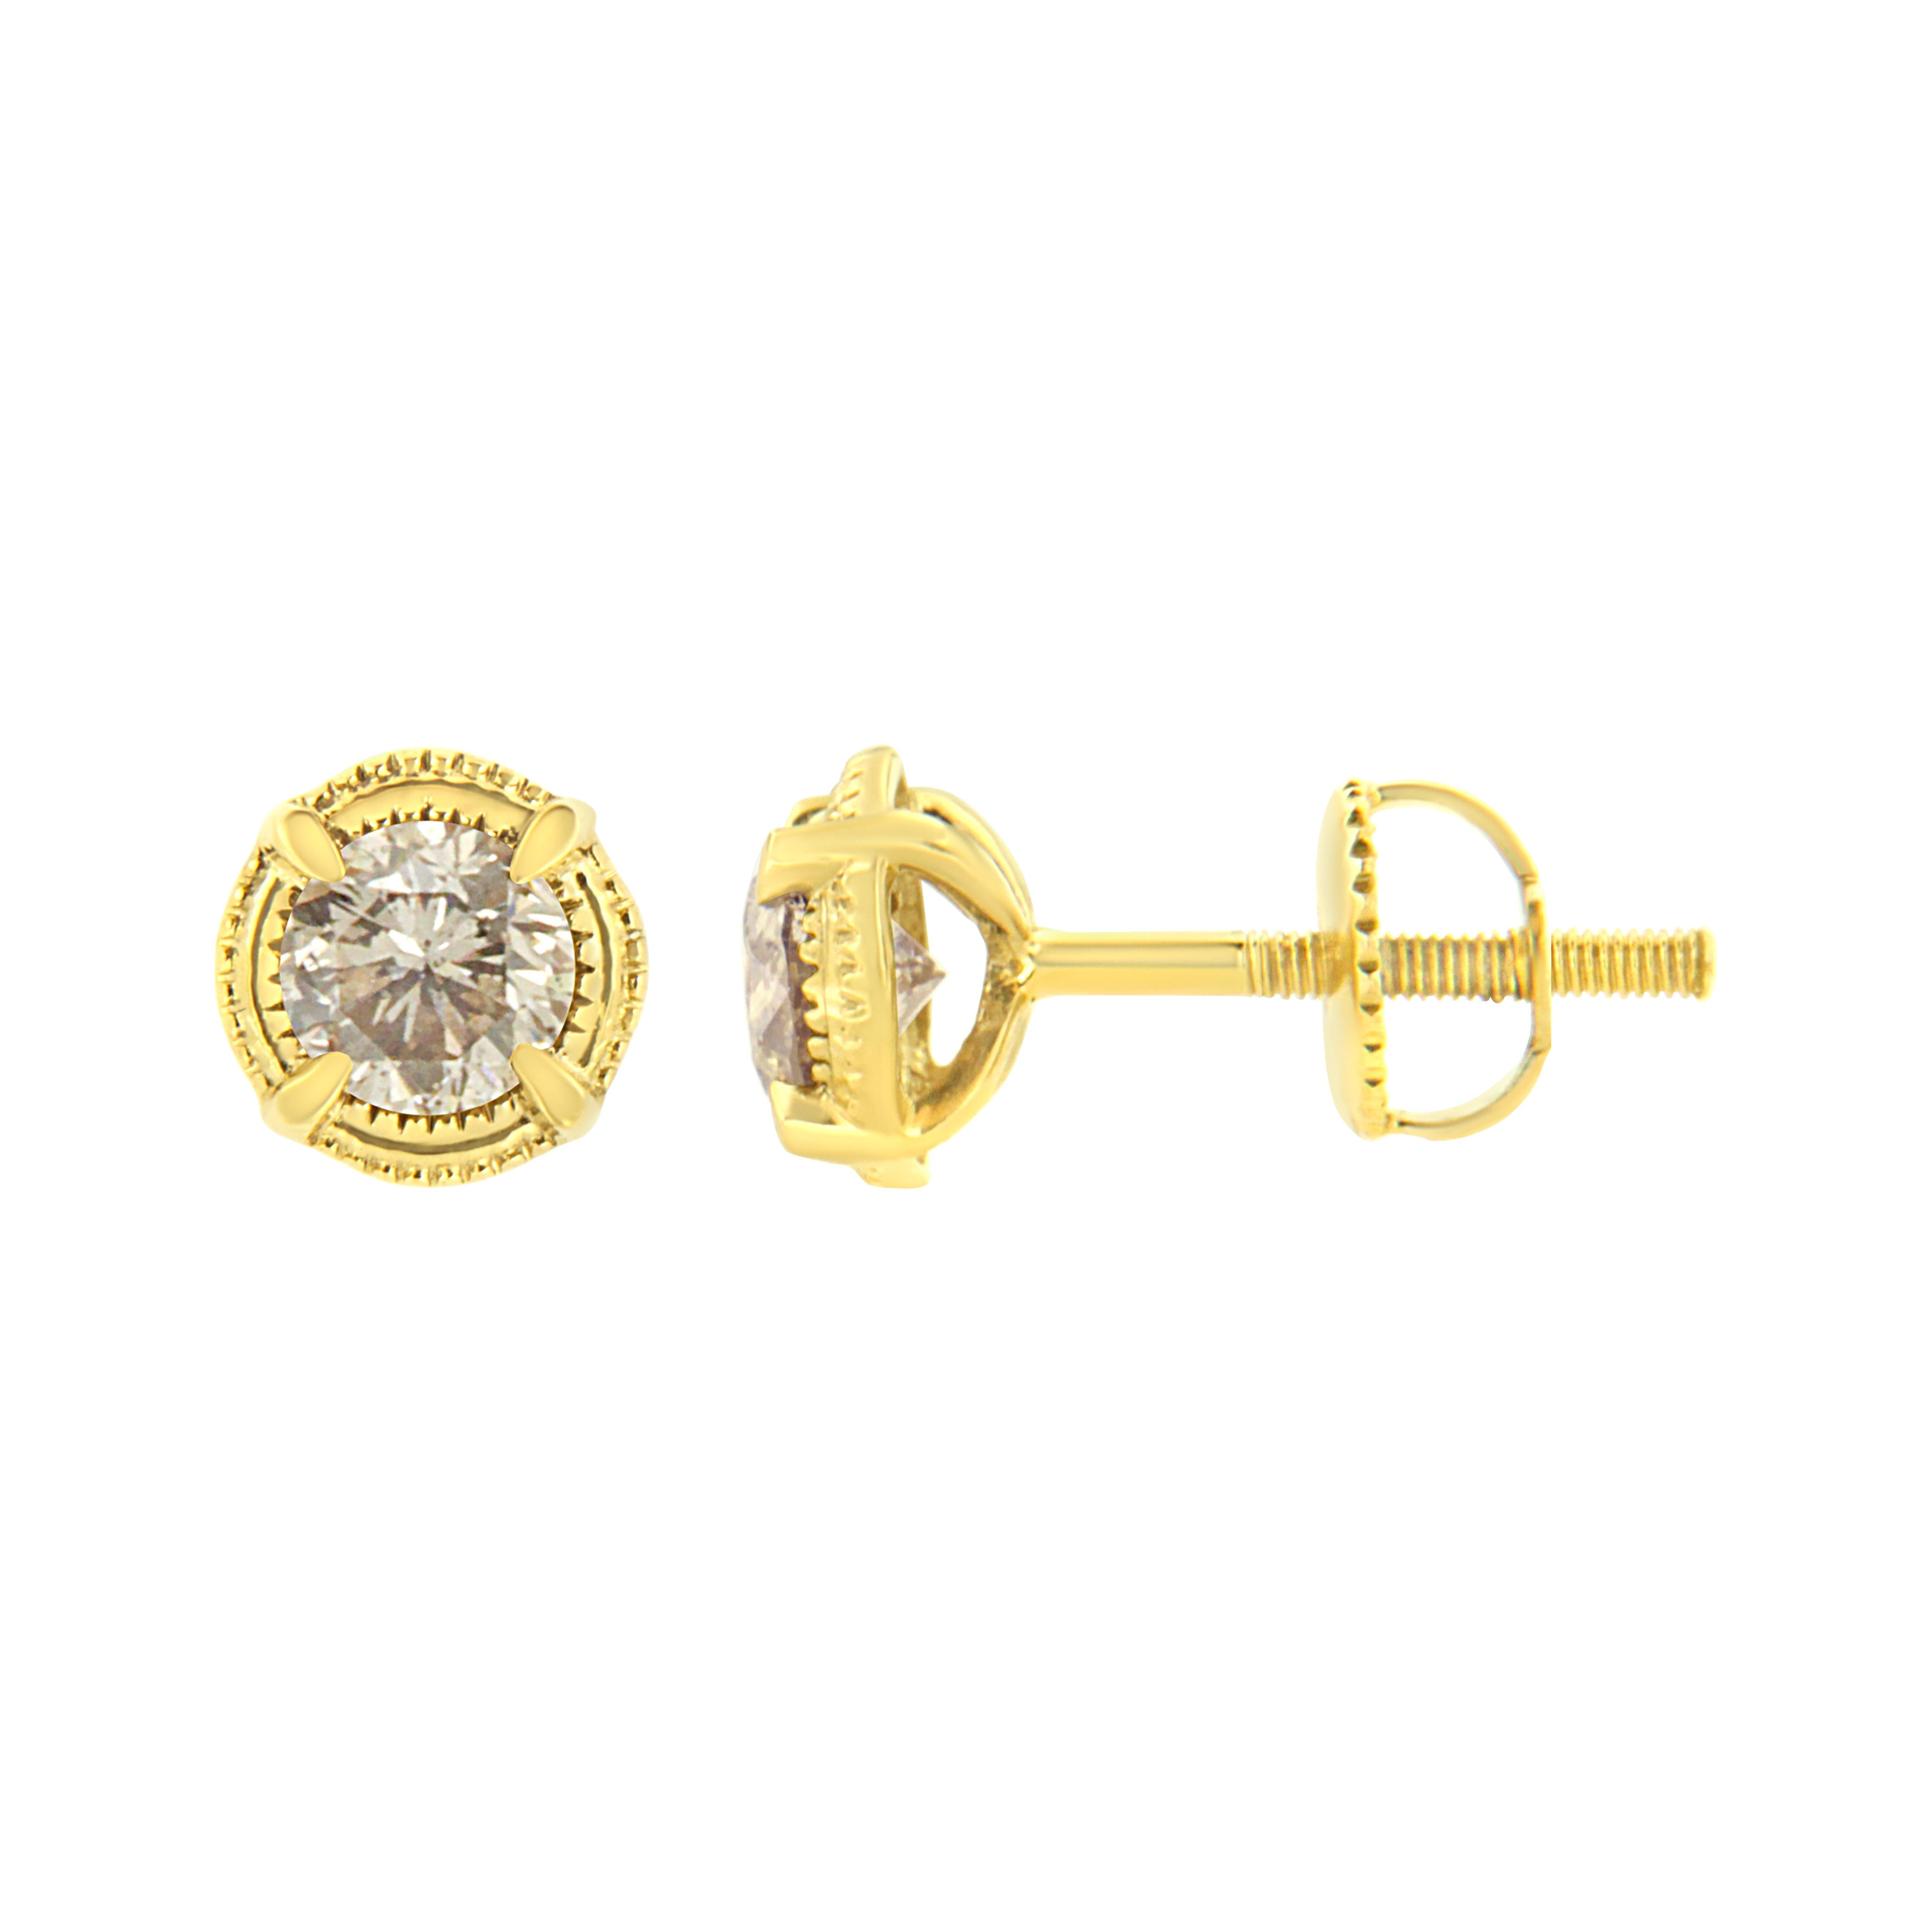 Delicate milgrain texture traces the edge of these stunning earrings crafted of genuine 14k Yellow gold plated .925 sterling silver. Diamonds are set at the center of the 4-prong design of each of these round stud earrings, for 0.25 carat of